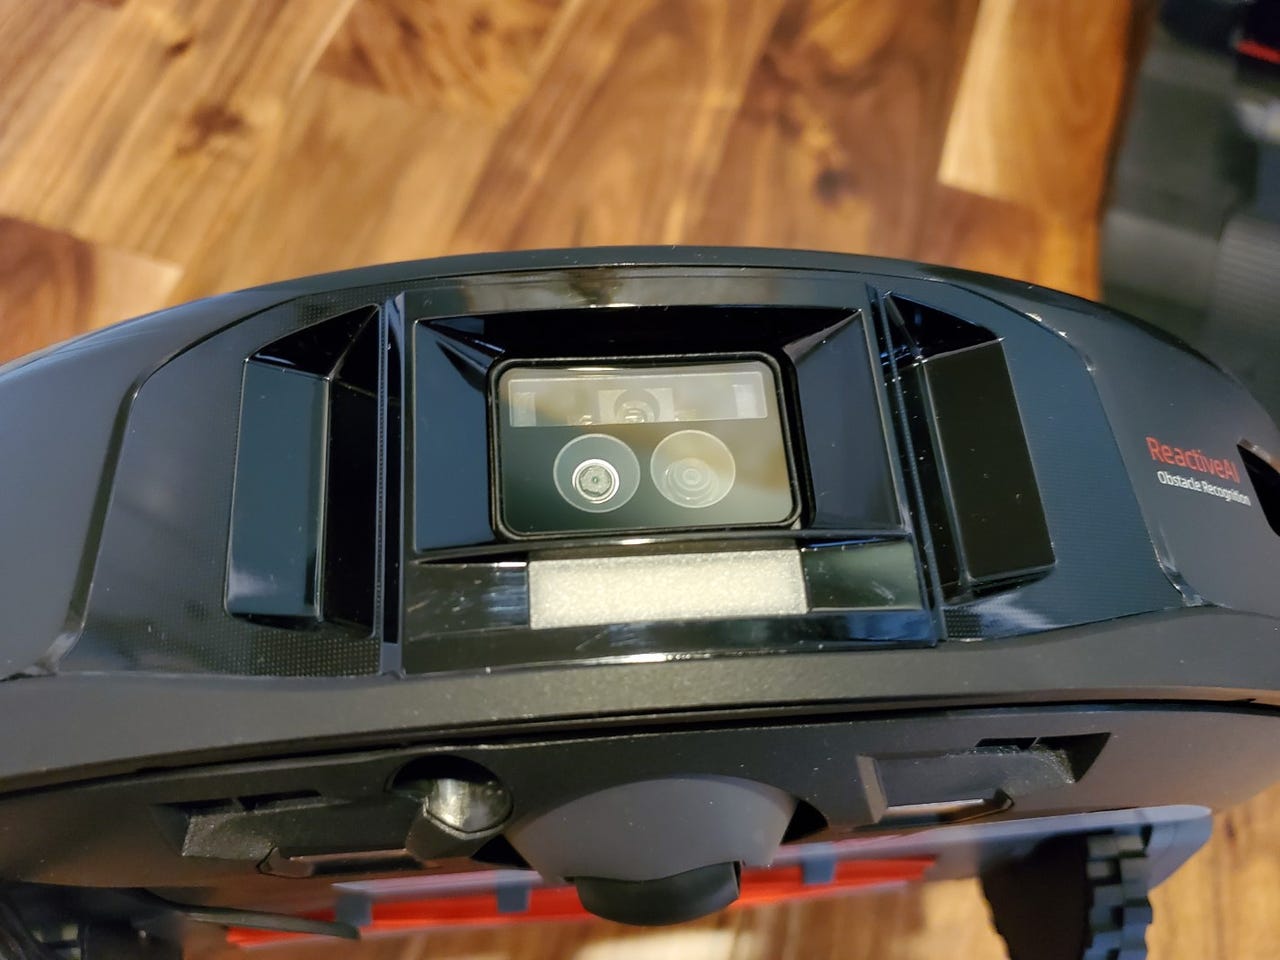 Roborock S7 MaxV Ultra review: The indulgent robot vacuum for lazy folks